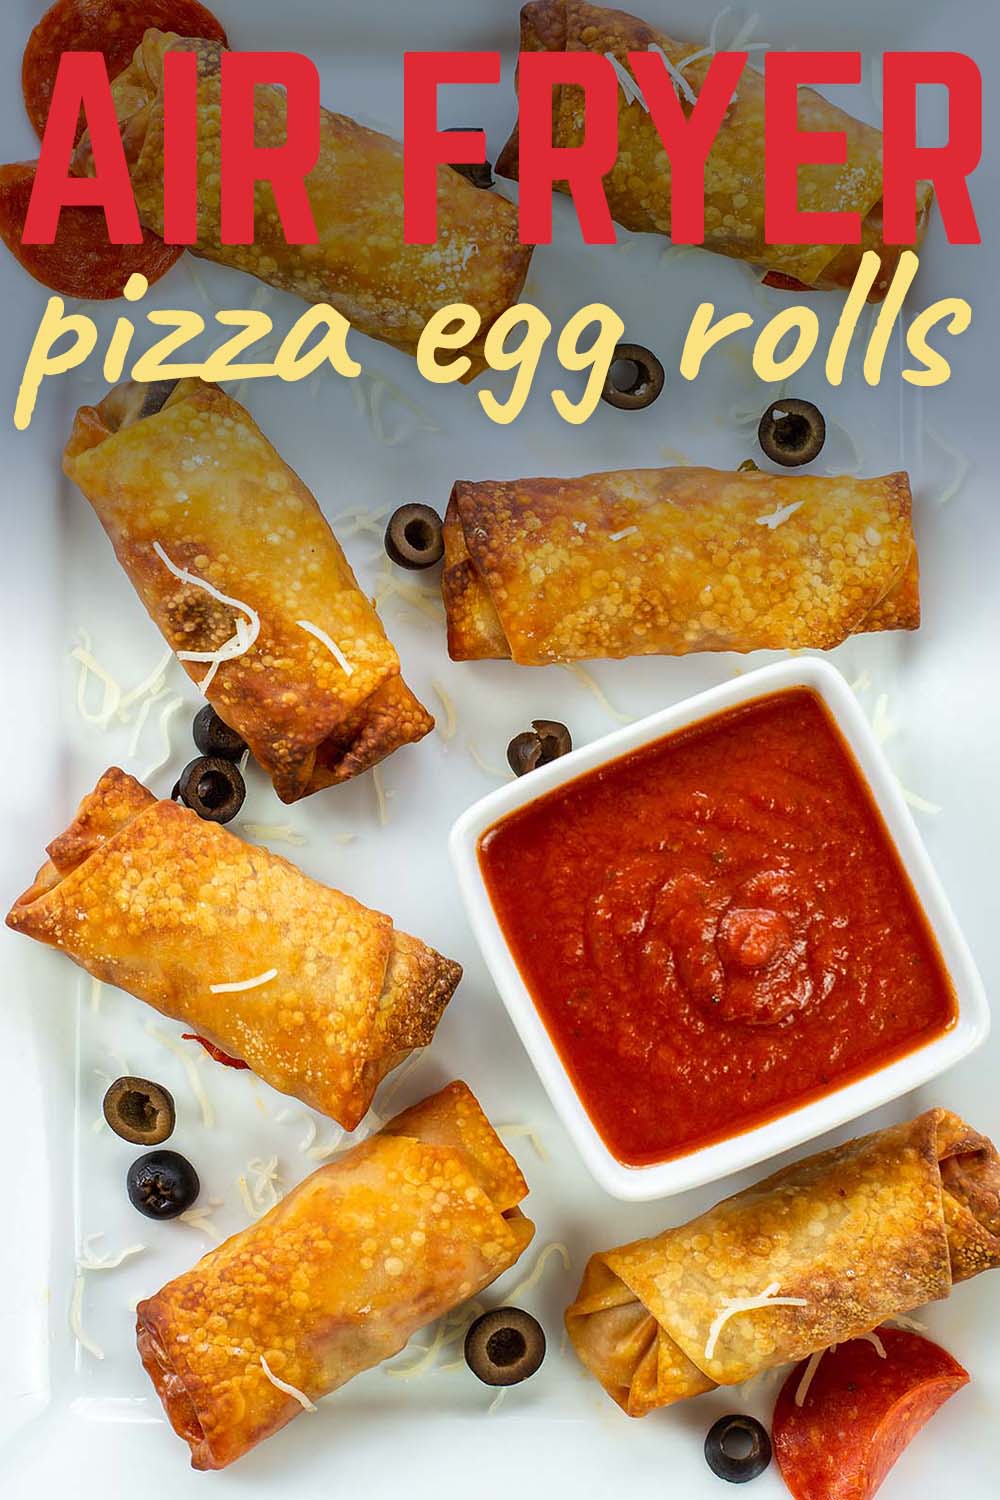 These egg rolls are fun to make and fun to eat with the pezza topping filling on the inside!